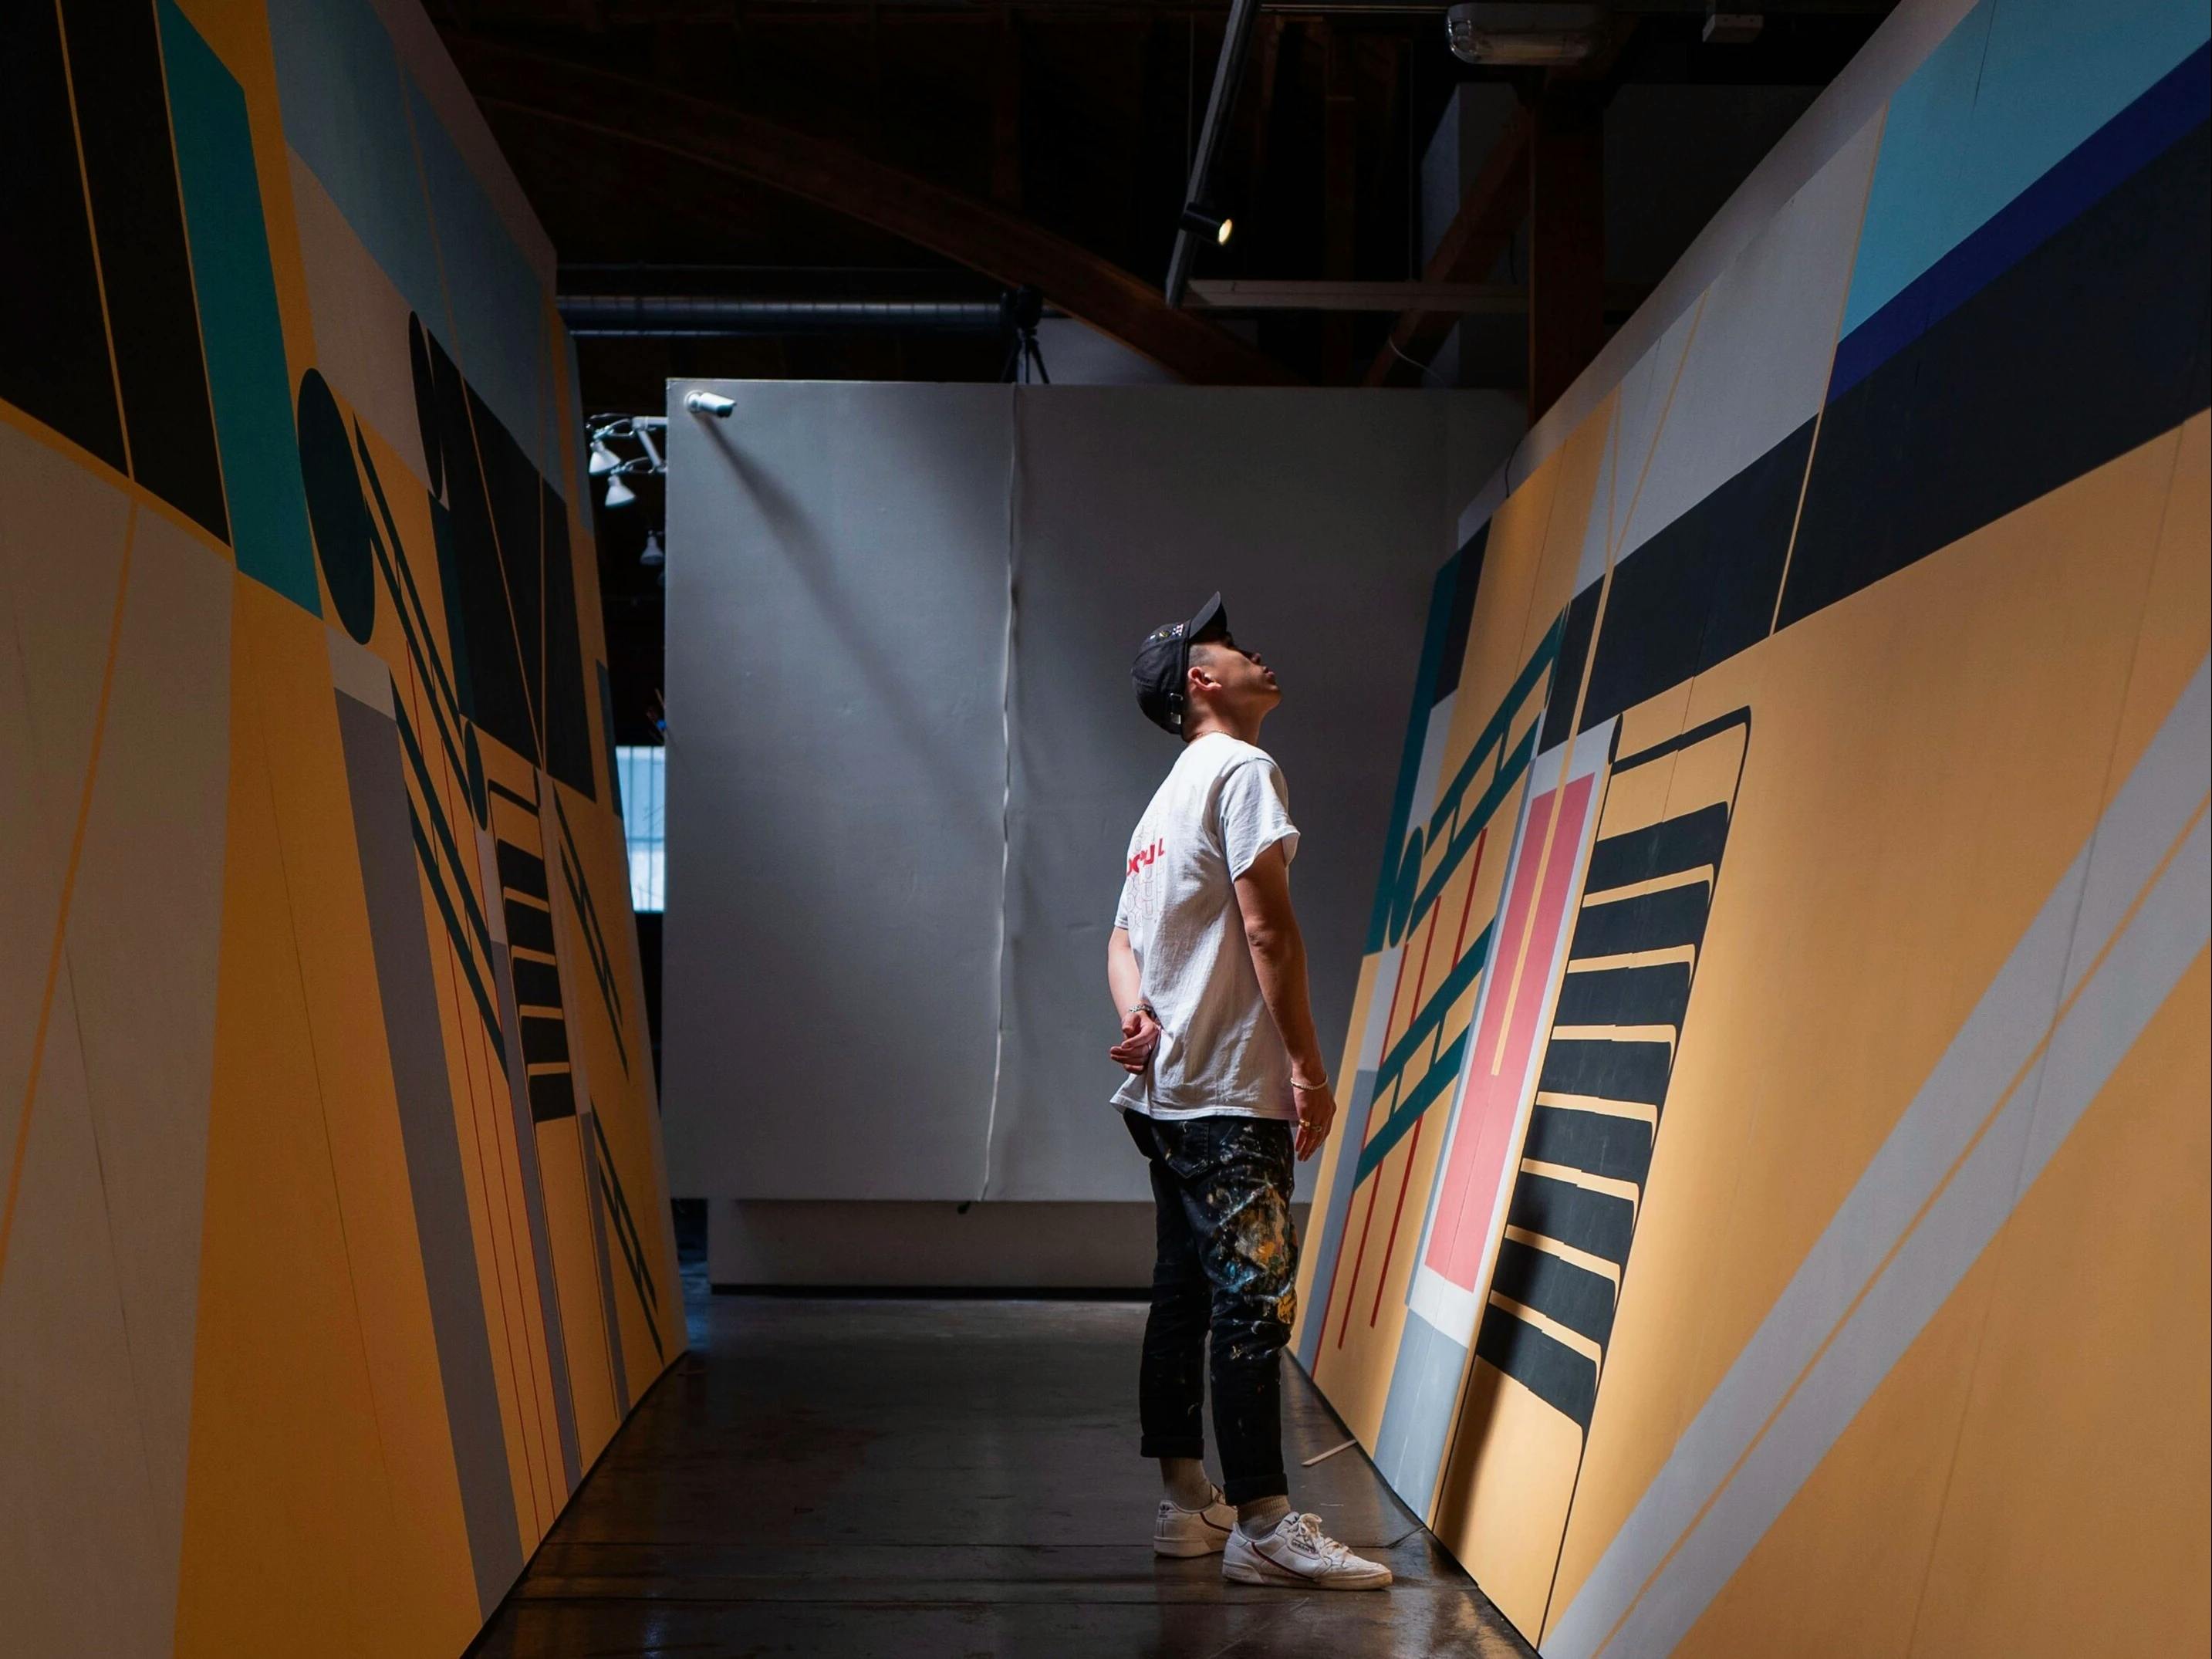 Artist Adrian Kay Wong wearing a baseball cap, white shirt, and paint-splattered jeans, standing in-between his two multicolored wall murals.